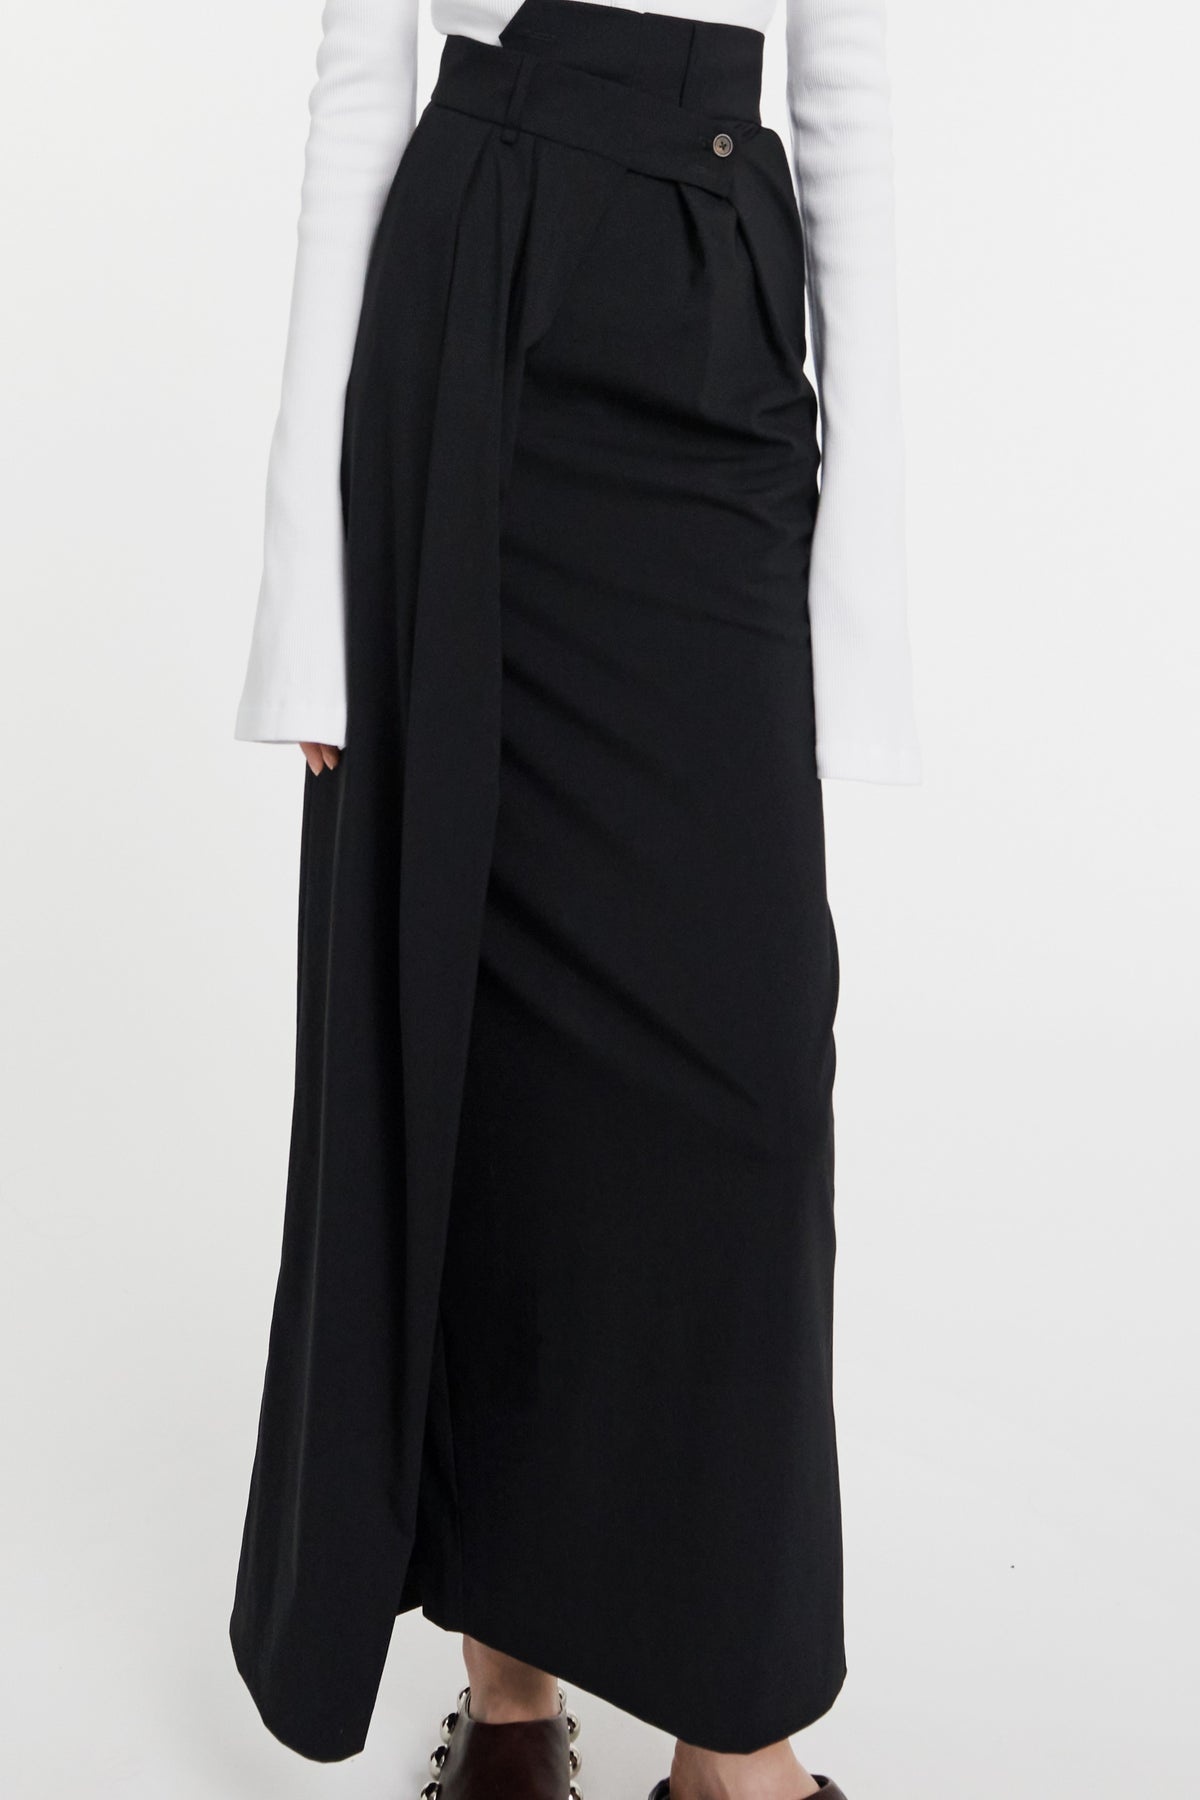 DECONSTRUCTED TROUSERS SKIRT BLACK - 8